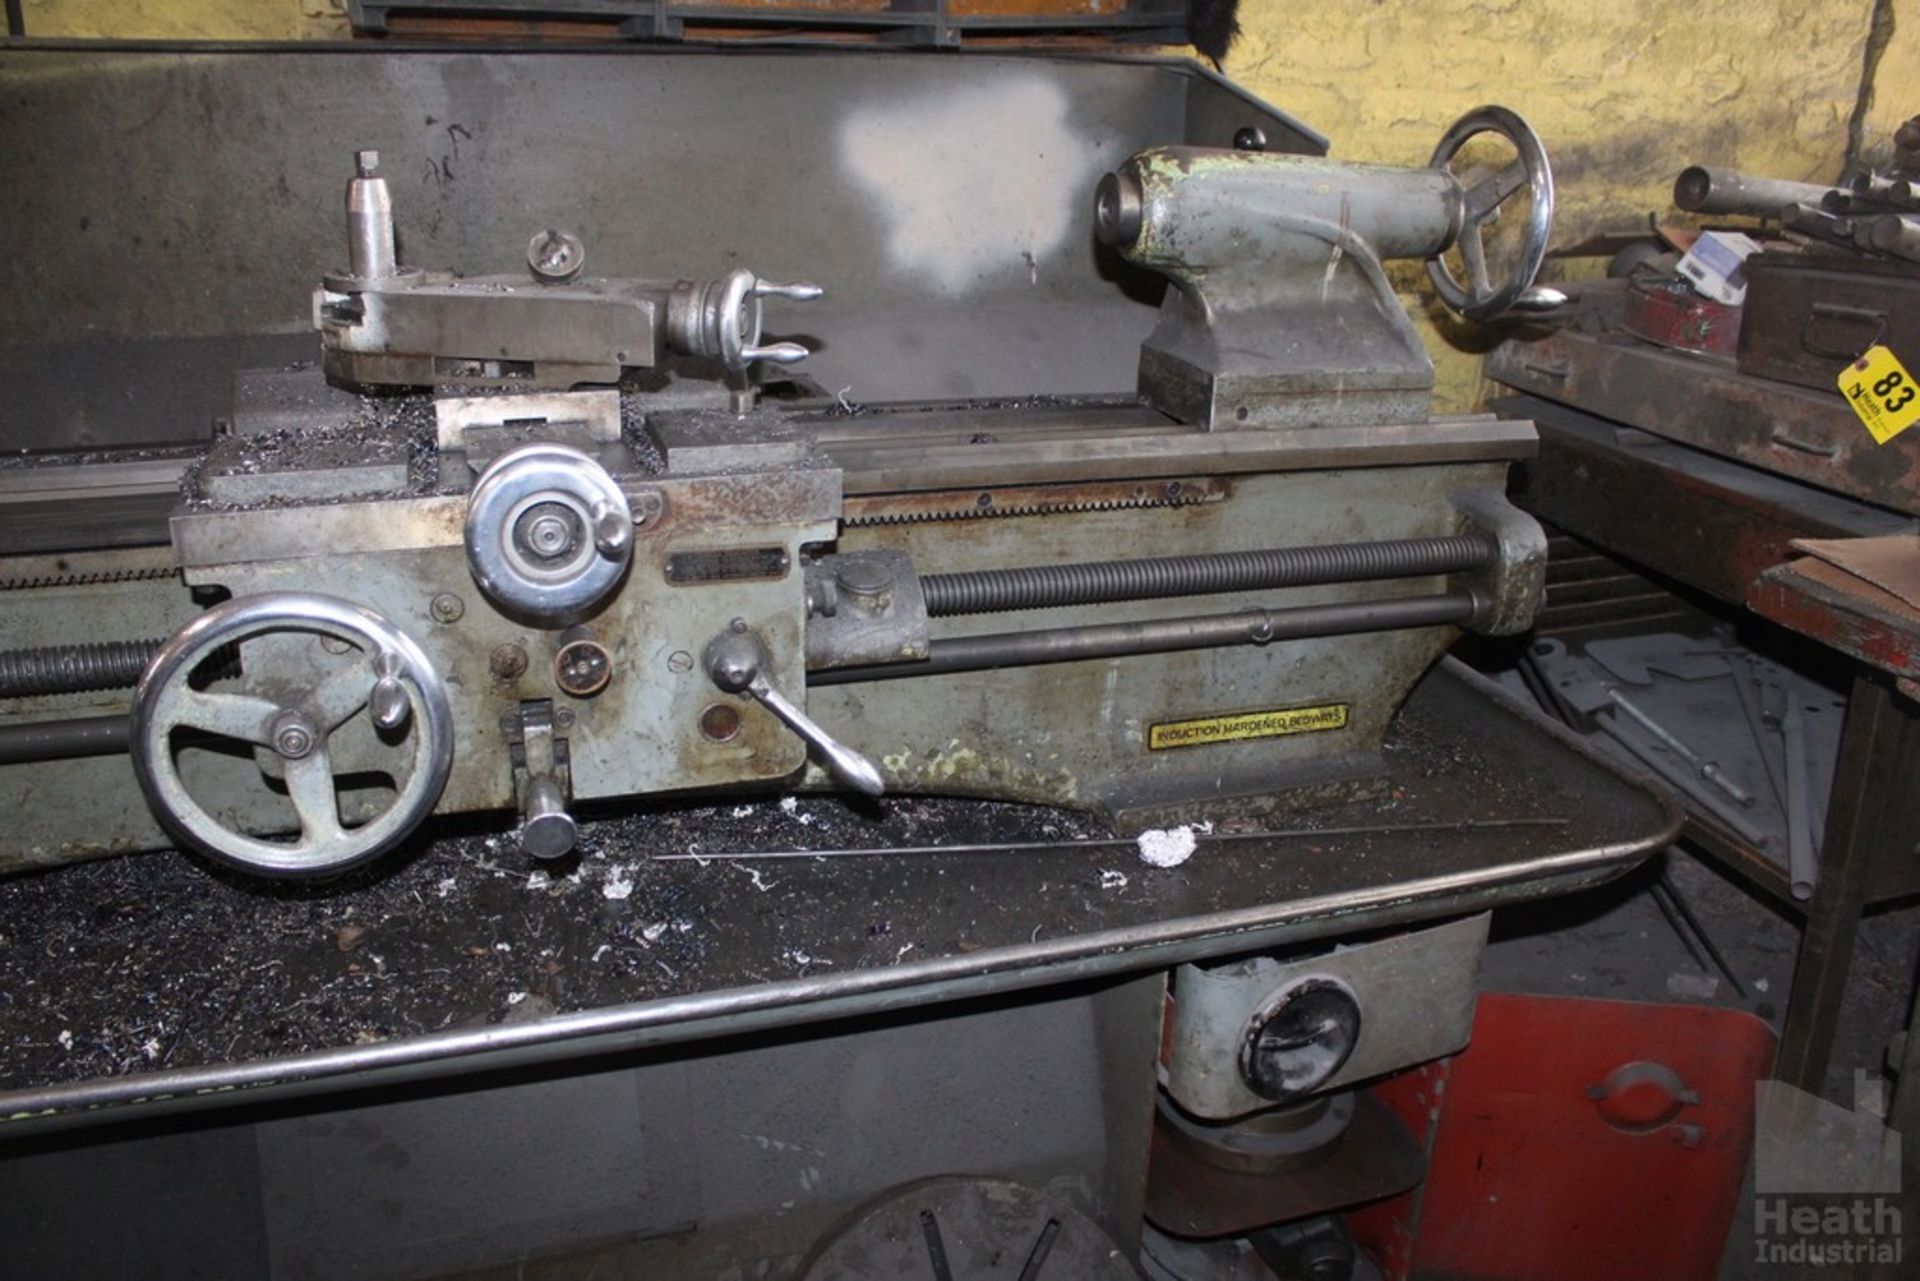 CLAUSING COLCHESTER 15” x 48” TOOLROOM LATHE, S/N F-4750352, 1500 RPM SPINDLE, 3-JAW & 4-JAW CHUCKS, - Image 3 of 9